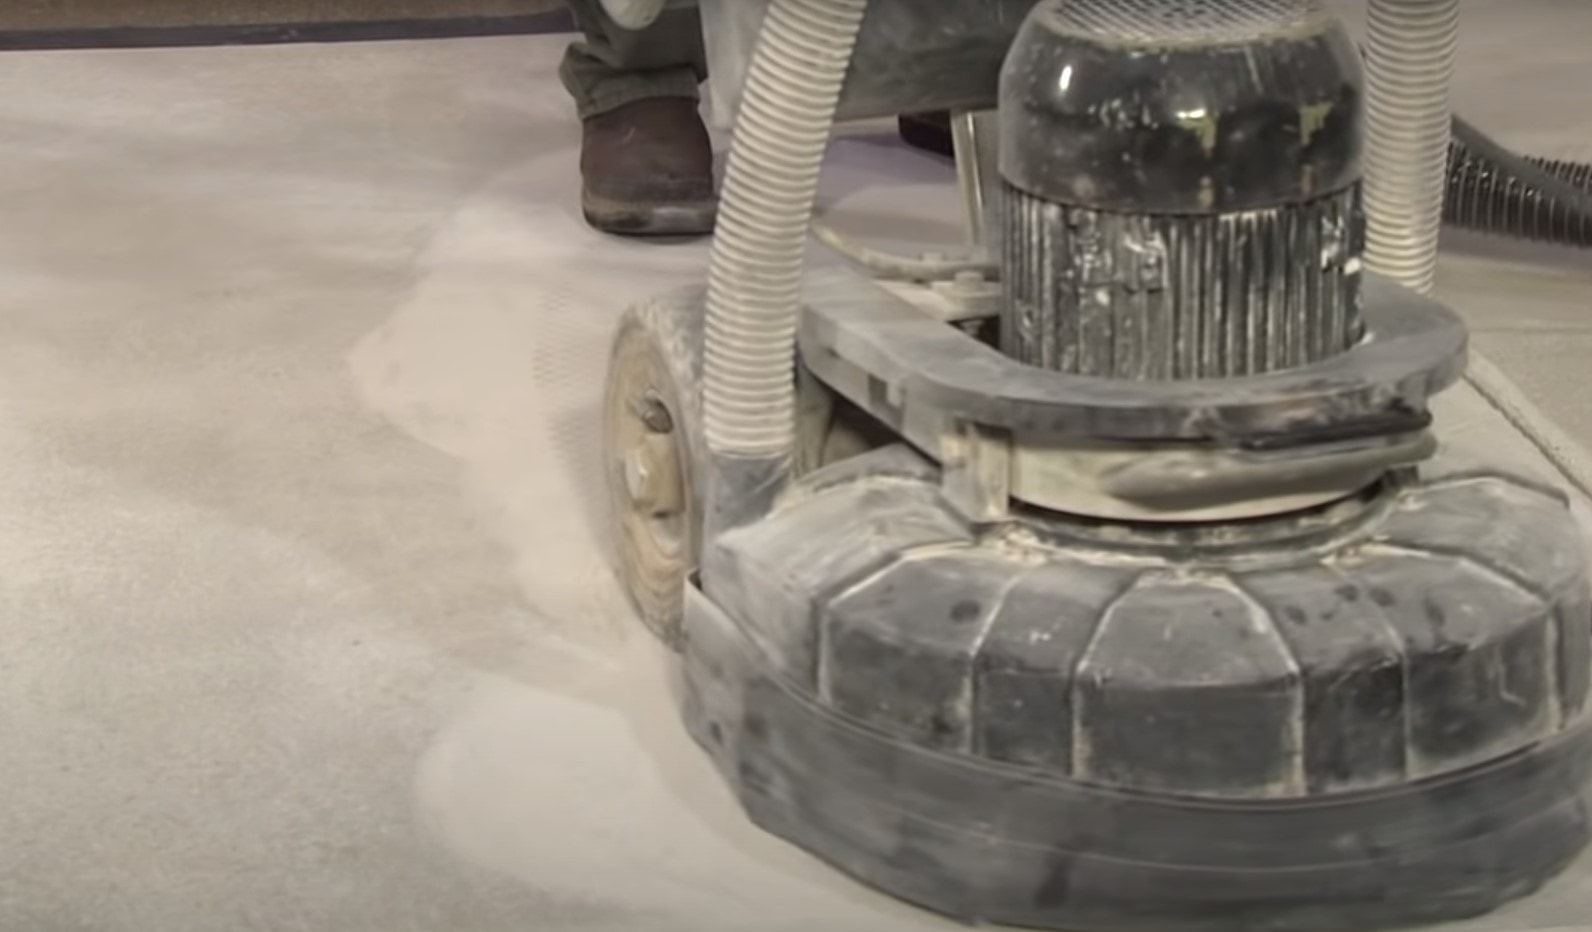 A Basic How-To on Preparing Your Concrete Floor Before Sealing